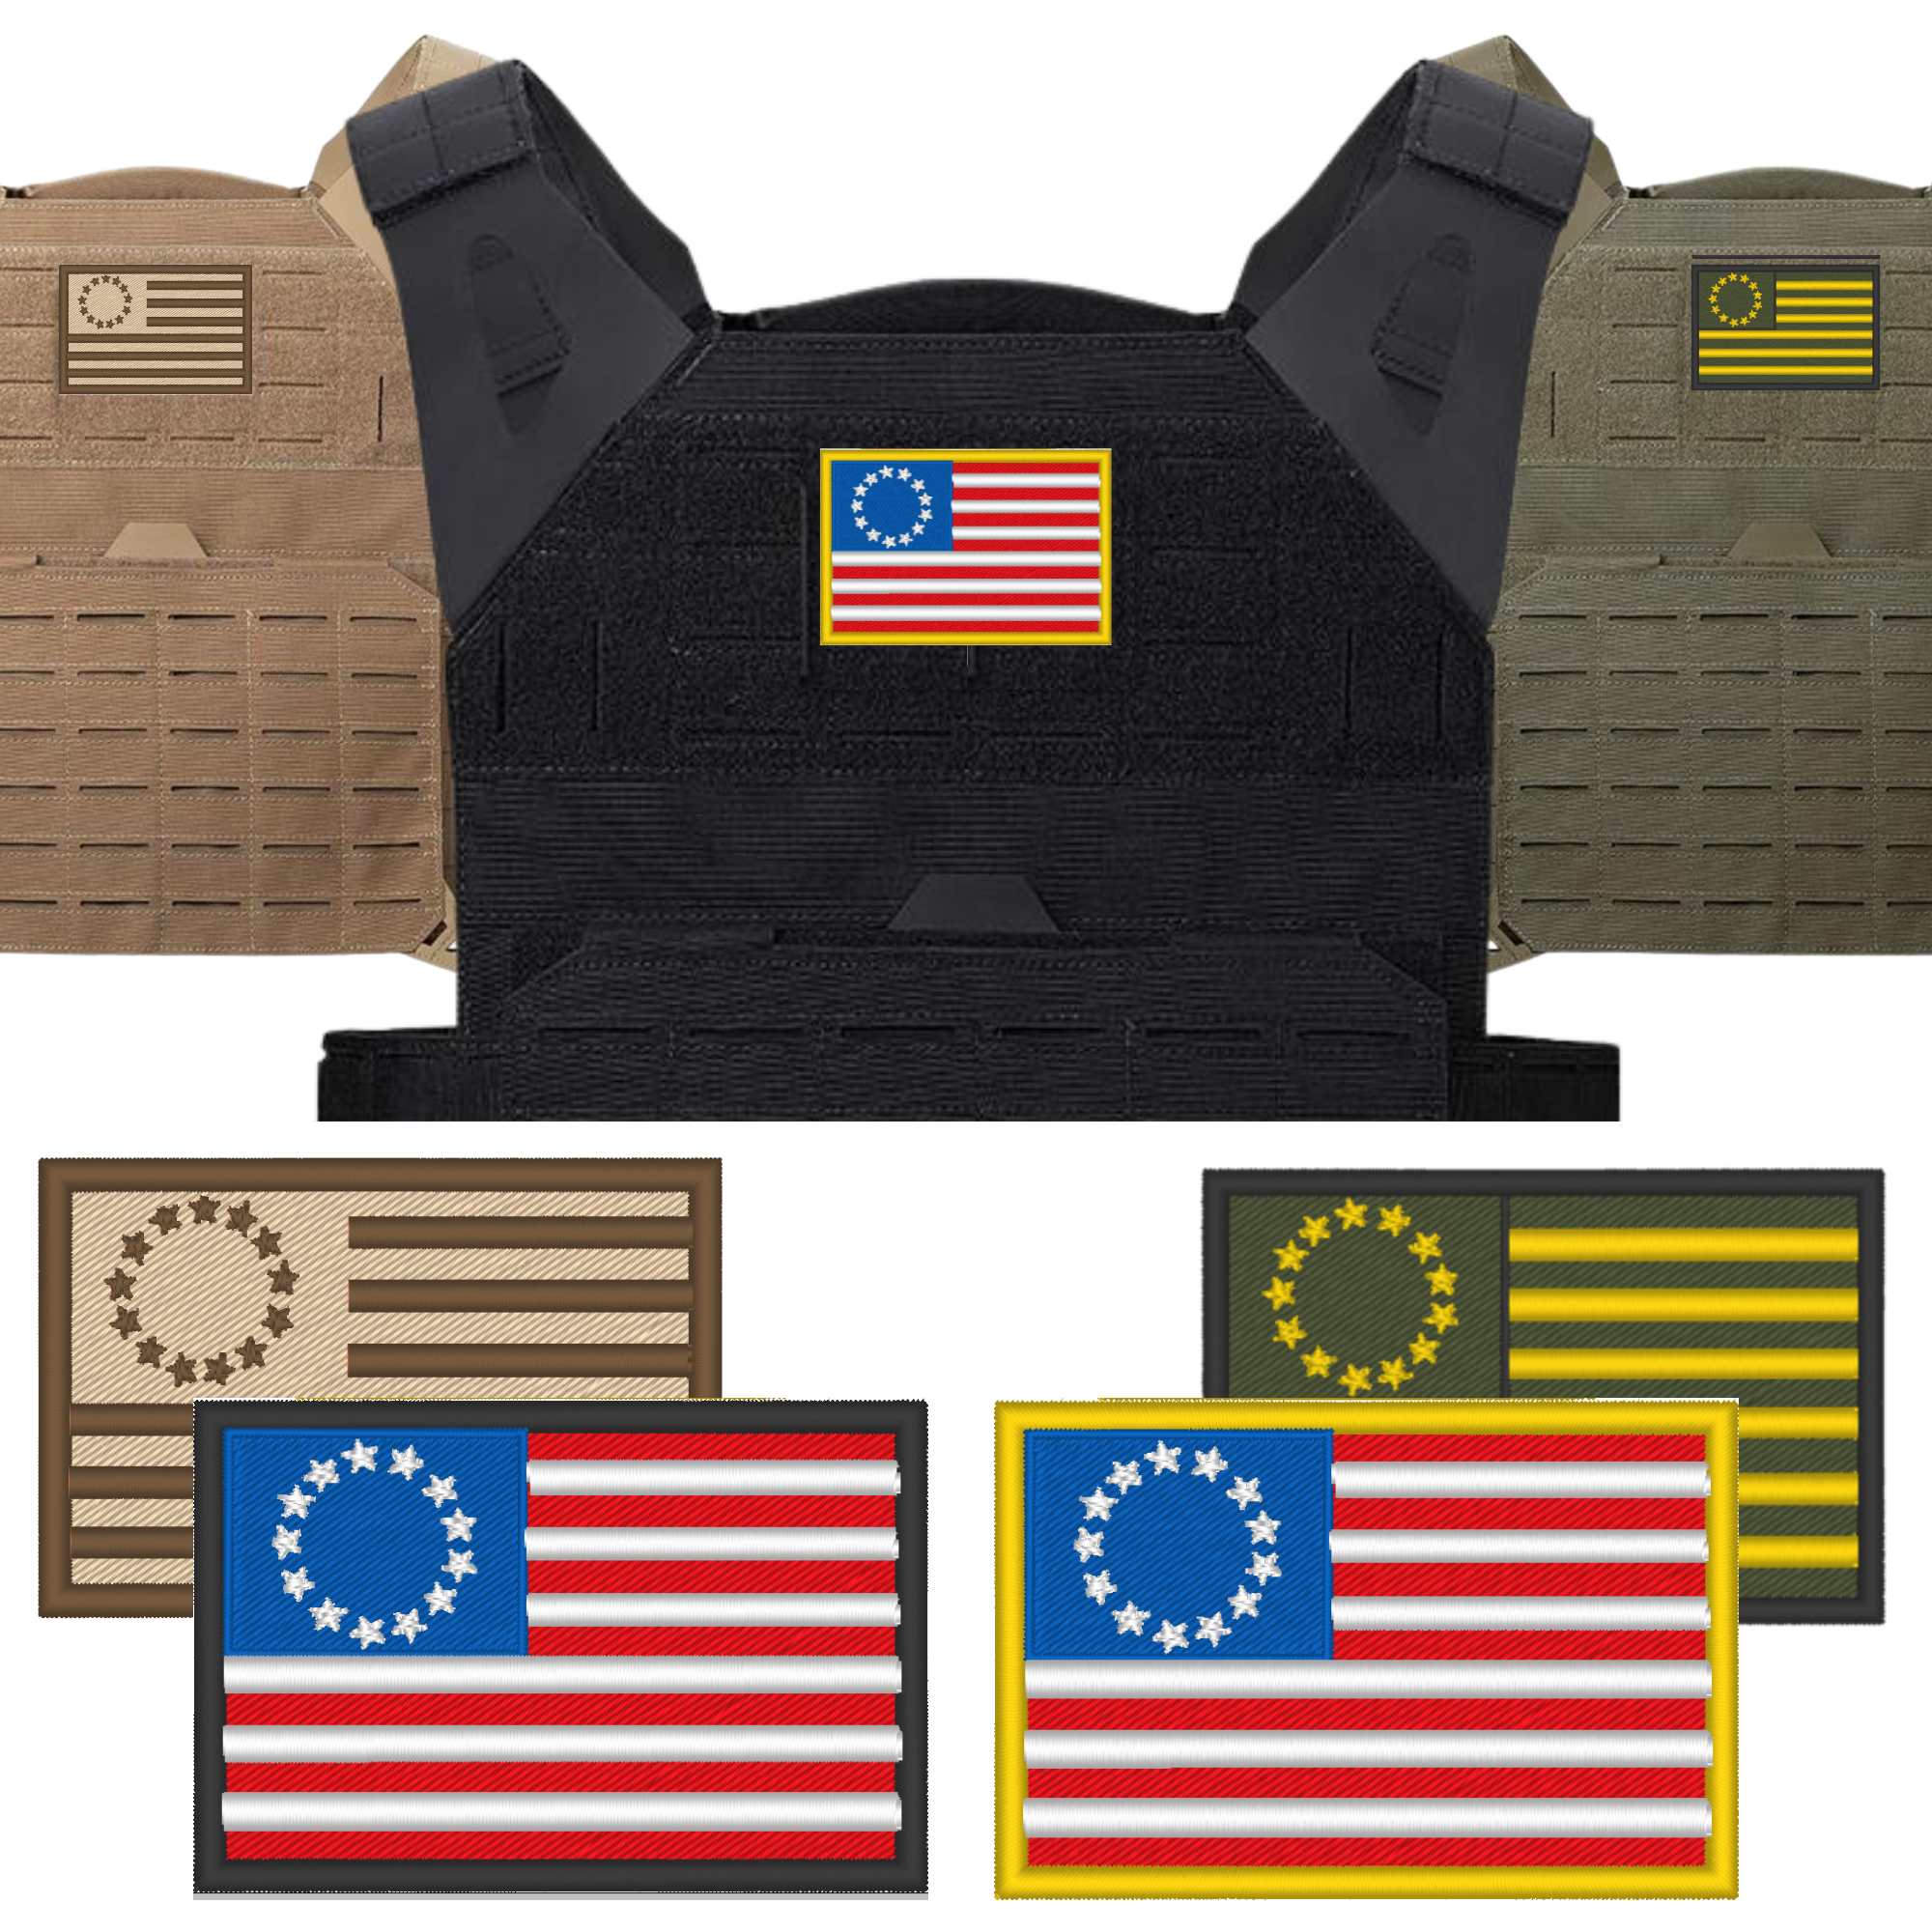 B Ross American Flag - Plate Carrier Patch – American Citizens Defense